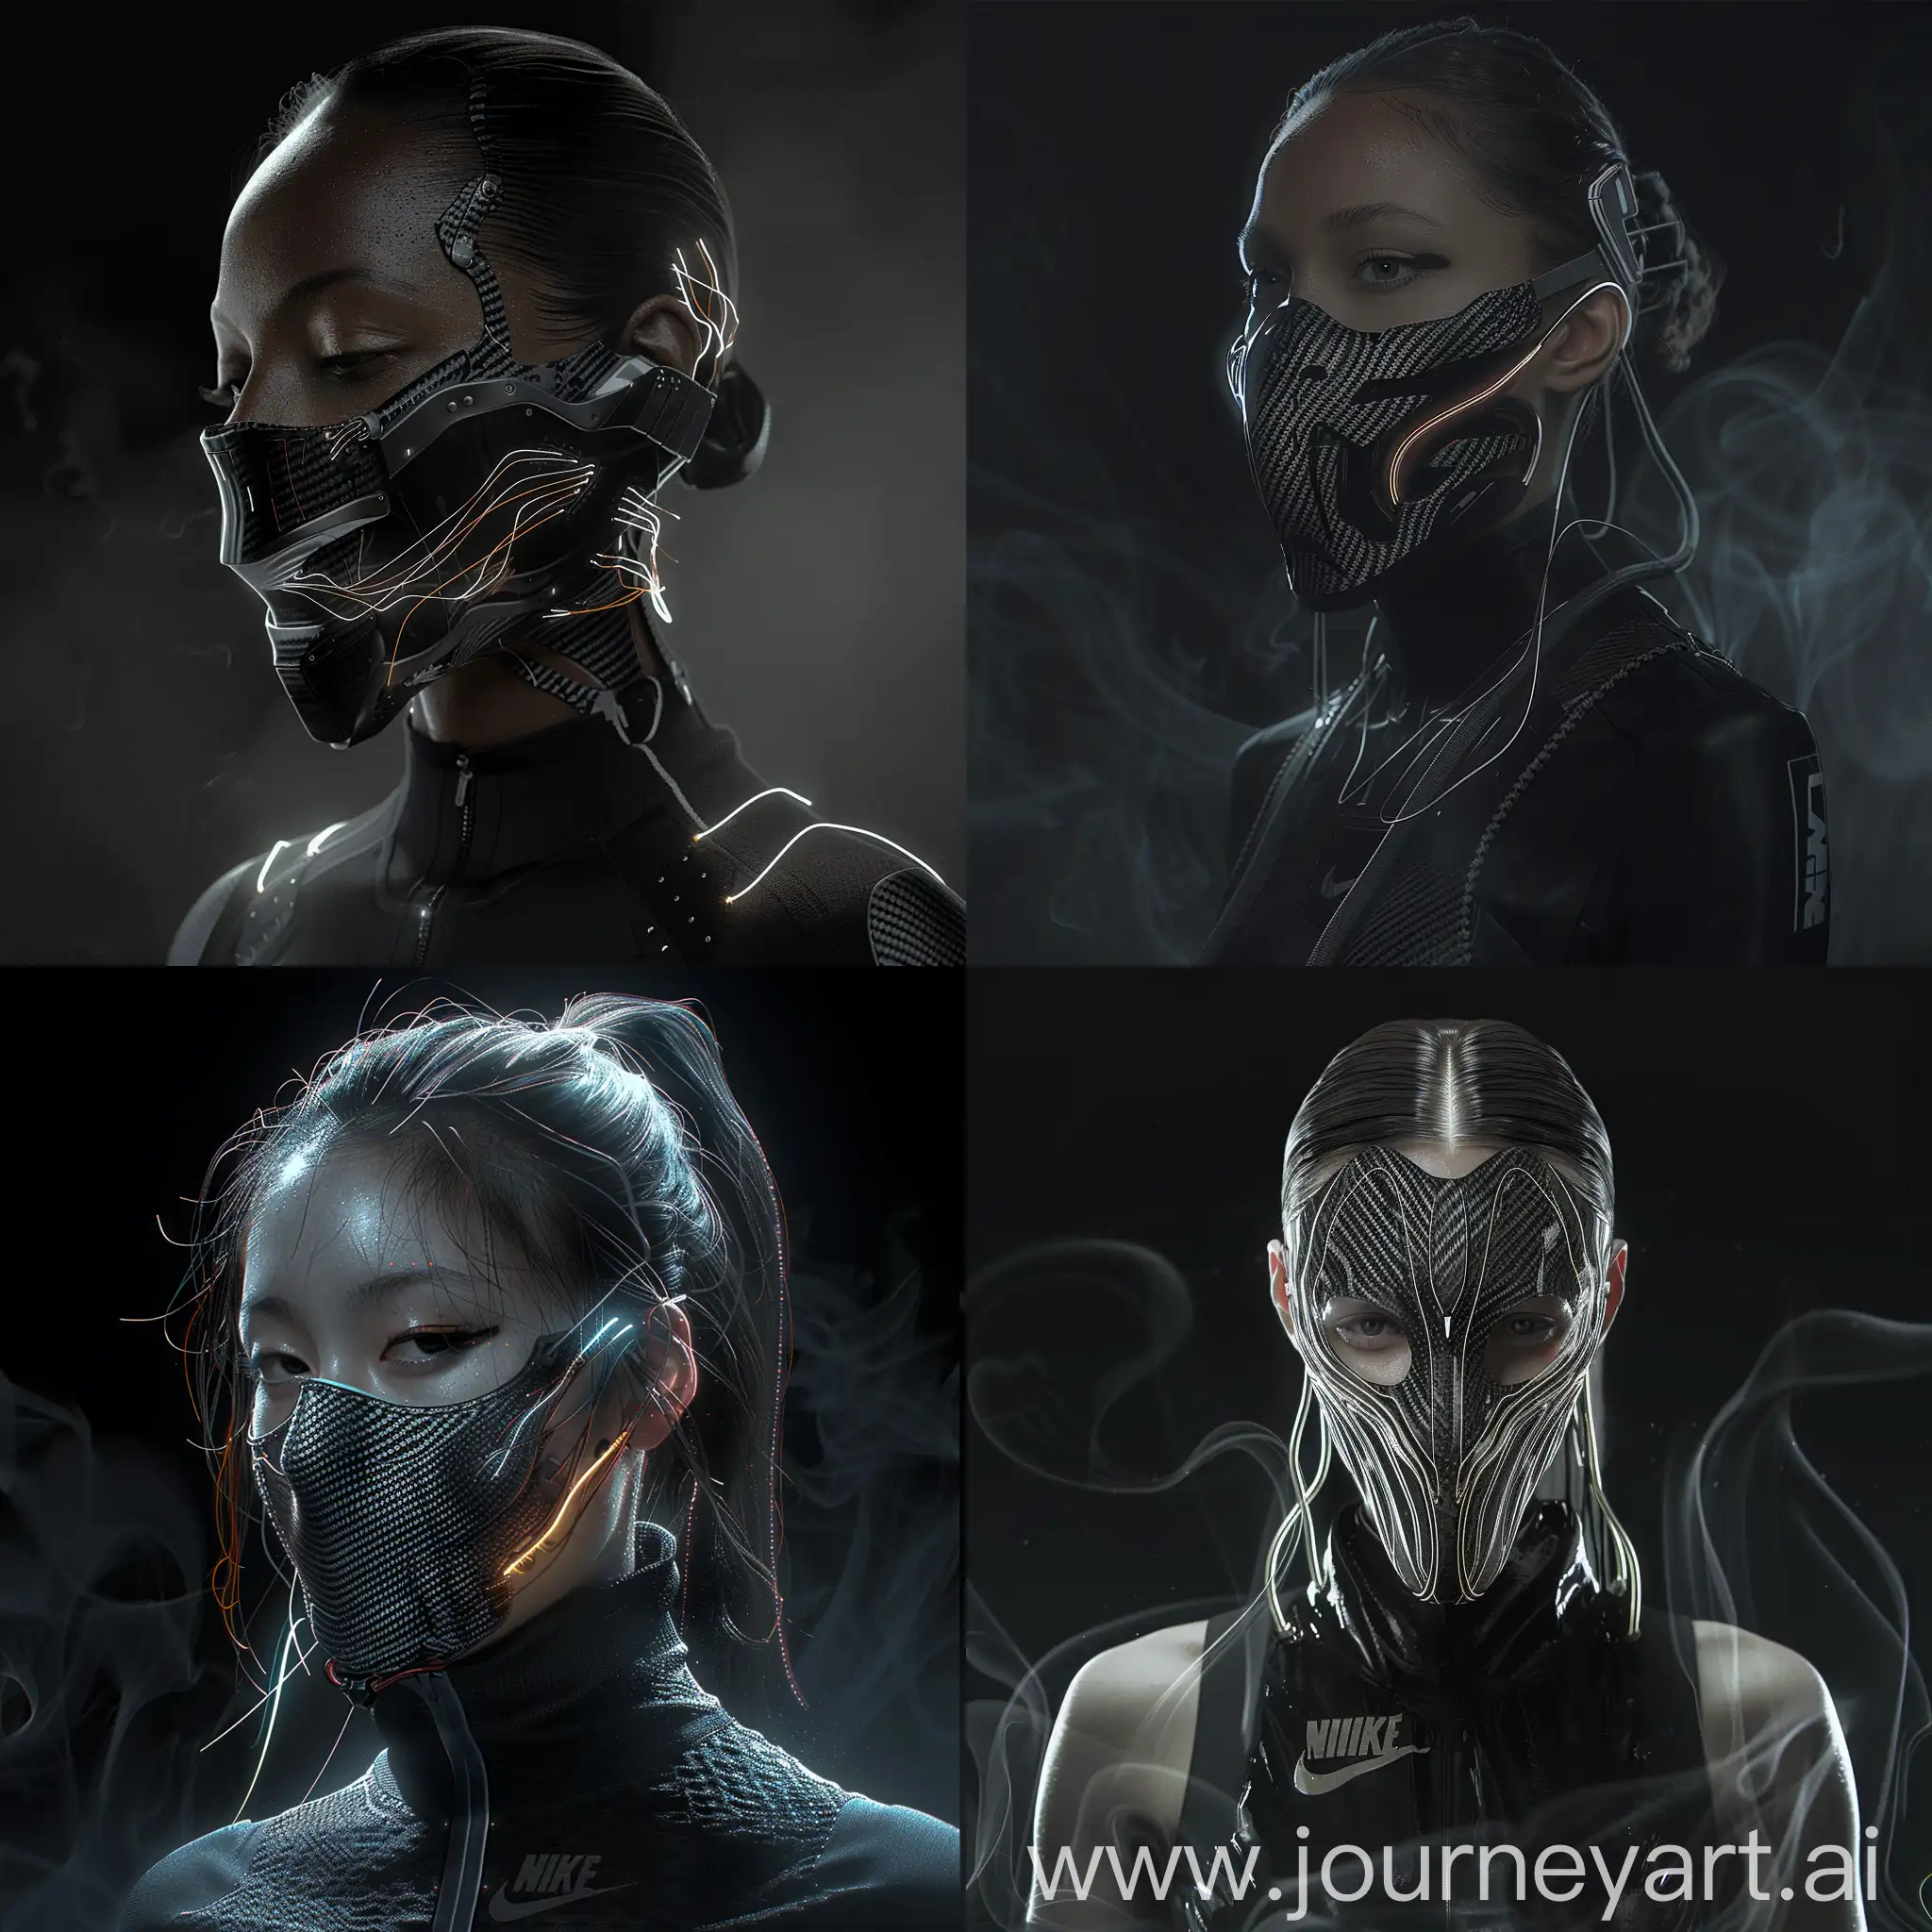 Against a sleek black backdrop, behold a mesmerizing character adorned with a cybernetic mouth-covering mask, where sleek carbon fiber textures form intricate patterns, shimmering with a futuristic elegance. Pulsating wires gracefully traverse the mask, imbuing it with vibrant energy that illuminates its contours. The mask's design incorporates sleek aluminum accents, adding a touch of sophistication to its futuristic appeal. Inspired by Nike's materials of hyper-performance, the ensemble exudes a sense of athletic prowess merged seamlessly with cyberpunk aesthetics. Symbolizing the delicate harmony between humanity and machine, her appearance radiates with the essence of a futuristic cyberpunk aesthetic. With dynamic movements reminiscent of action film sequences and cinematic haze enveloping her, she captivates with an irresistible allure, embodying a vision of elegant cyberpunk sophistication.